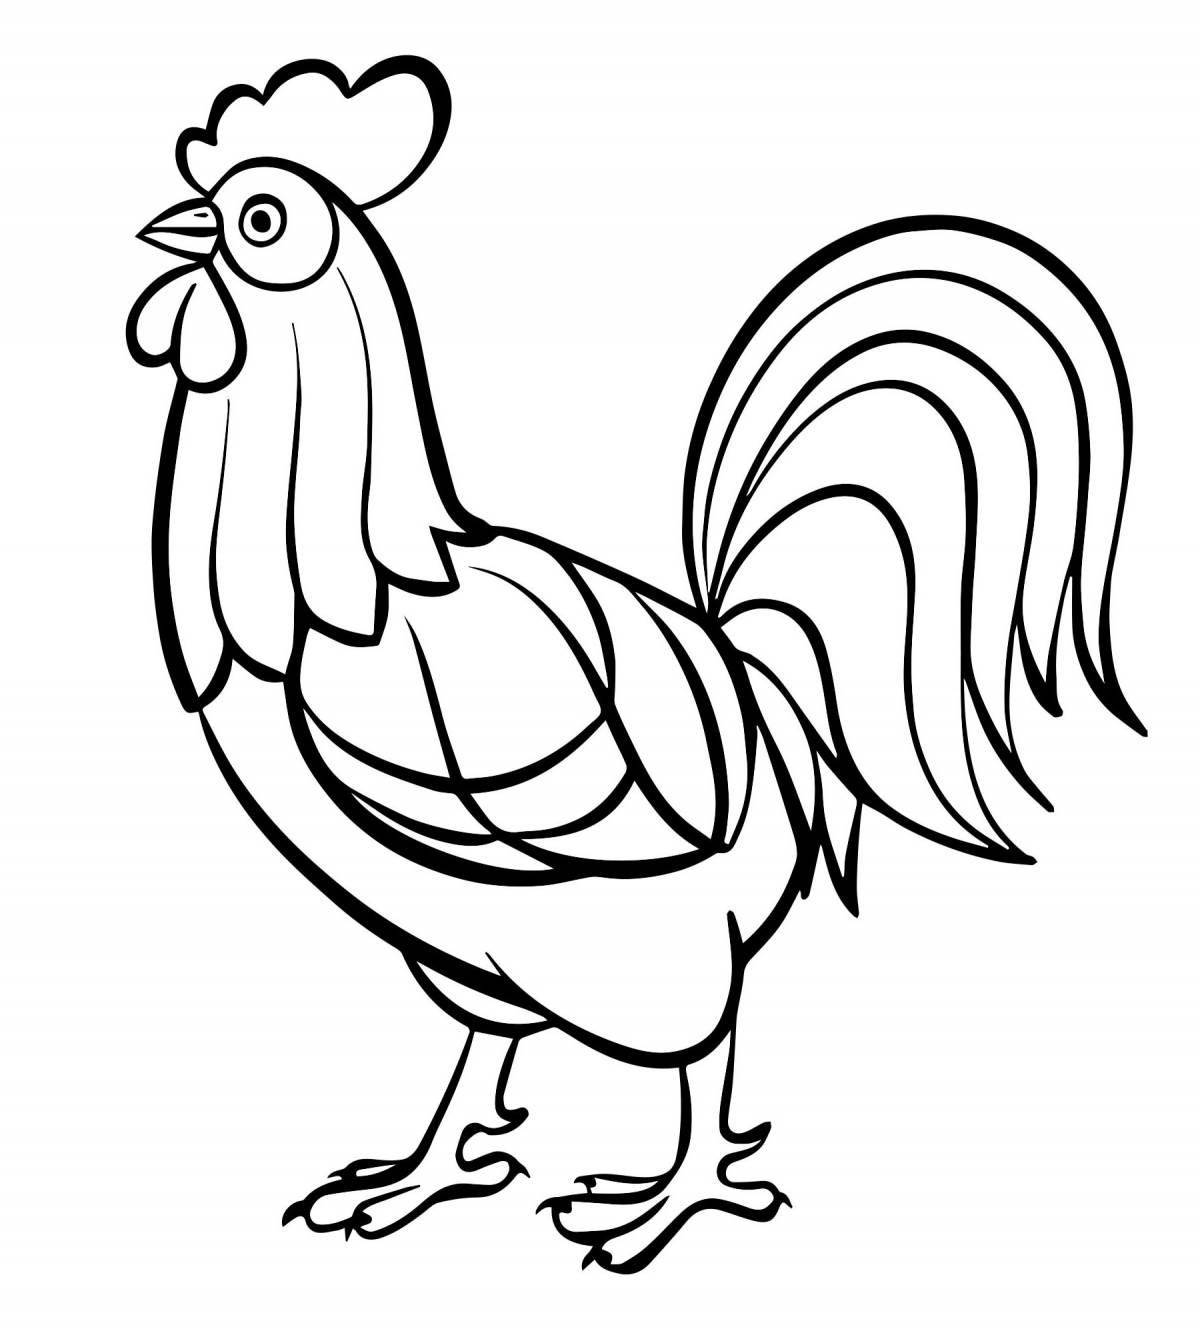 Coloring book brightly colored rooster